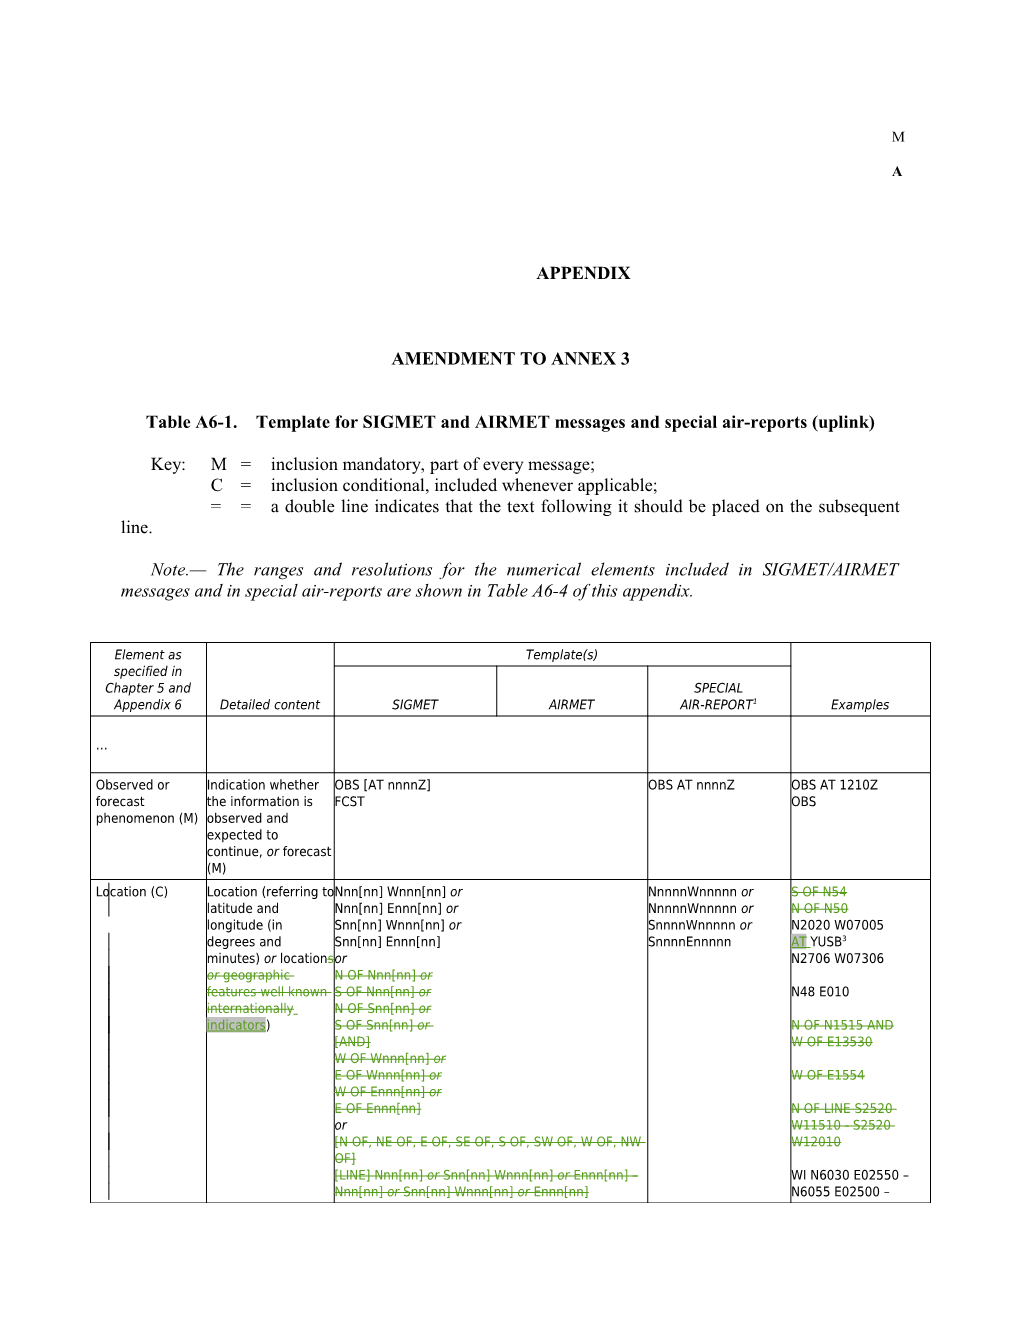 Amendment to the Template for Sigmet and Airmet